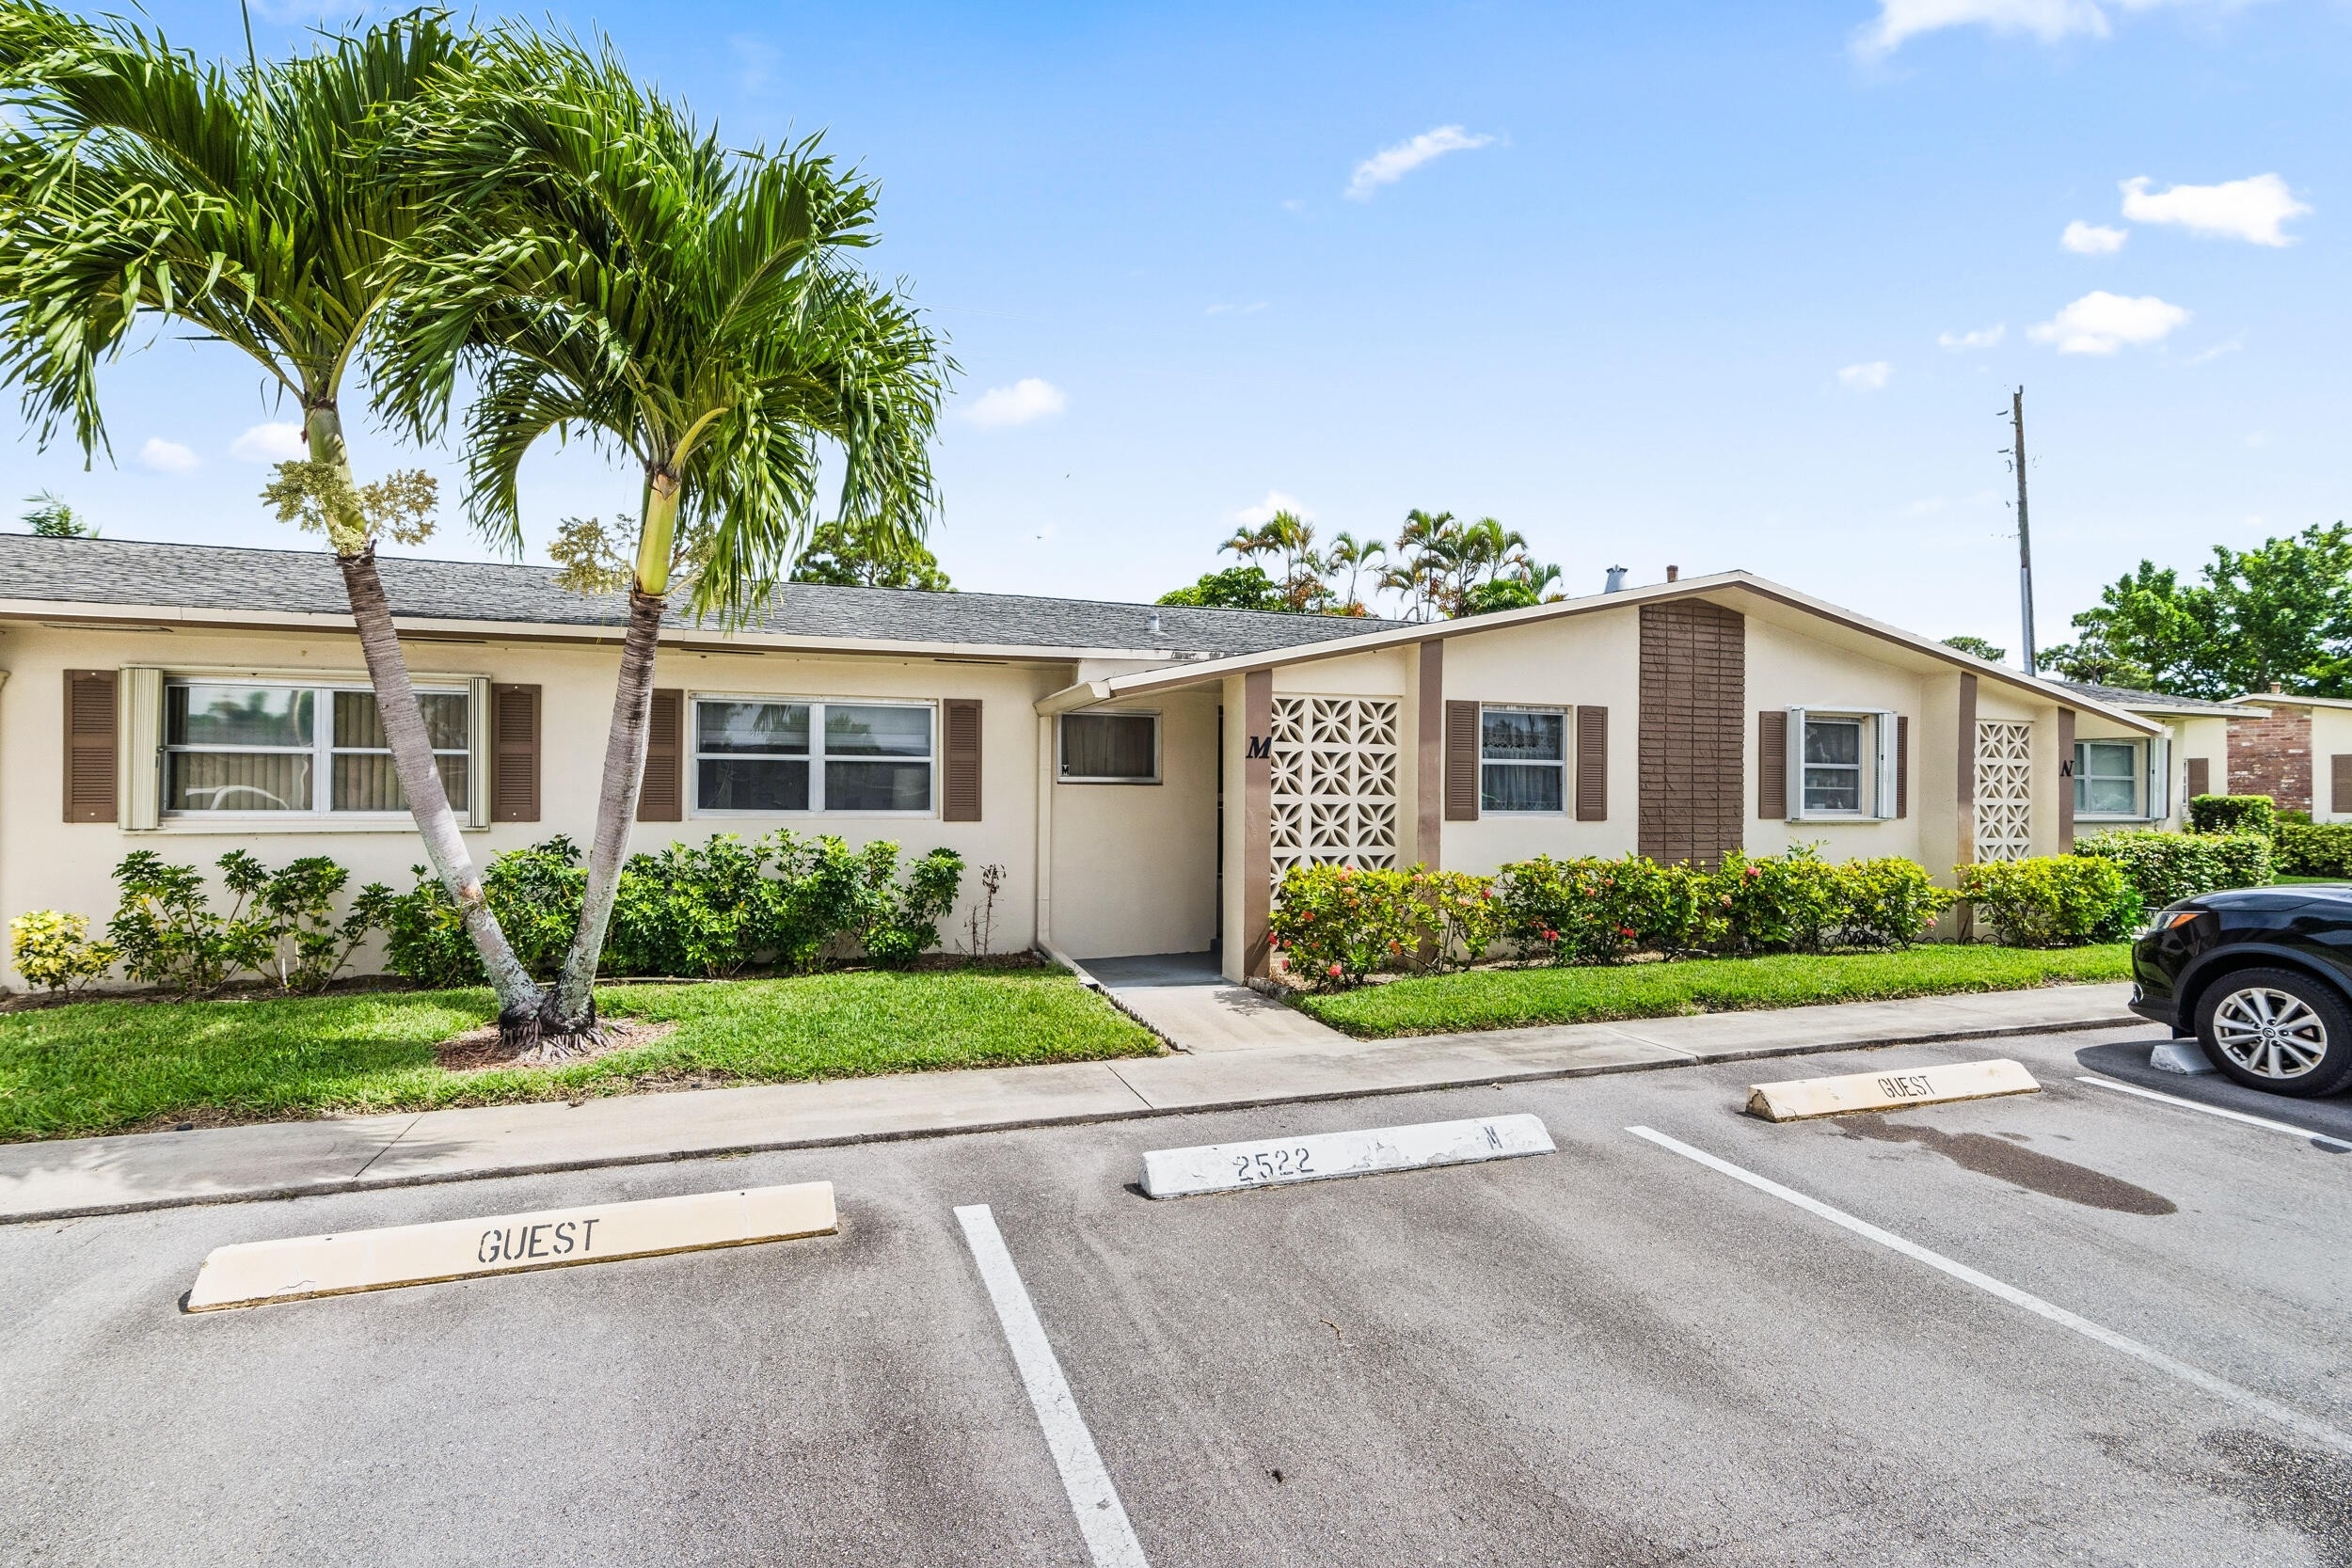 1. Condominiums at 2522 Emory Drive, M Cresthaven, West Palm Beach